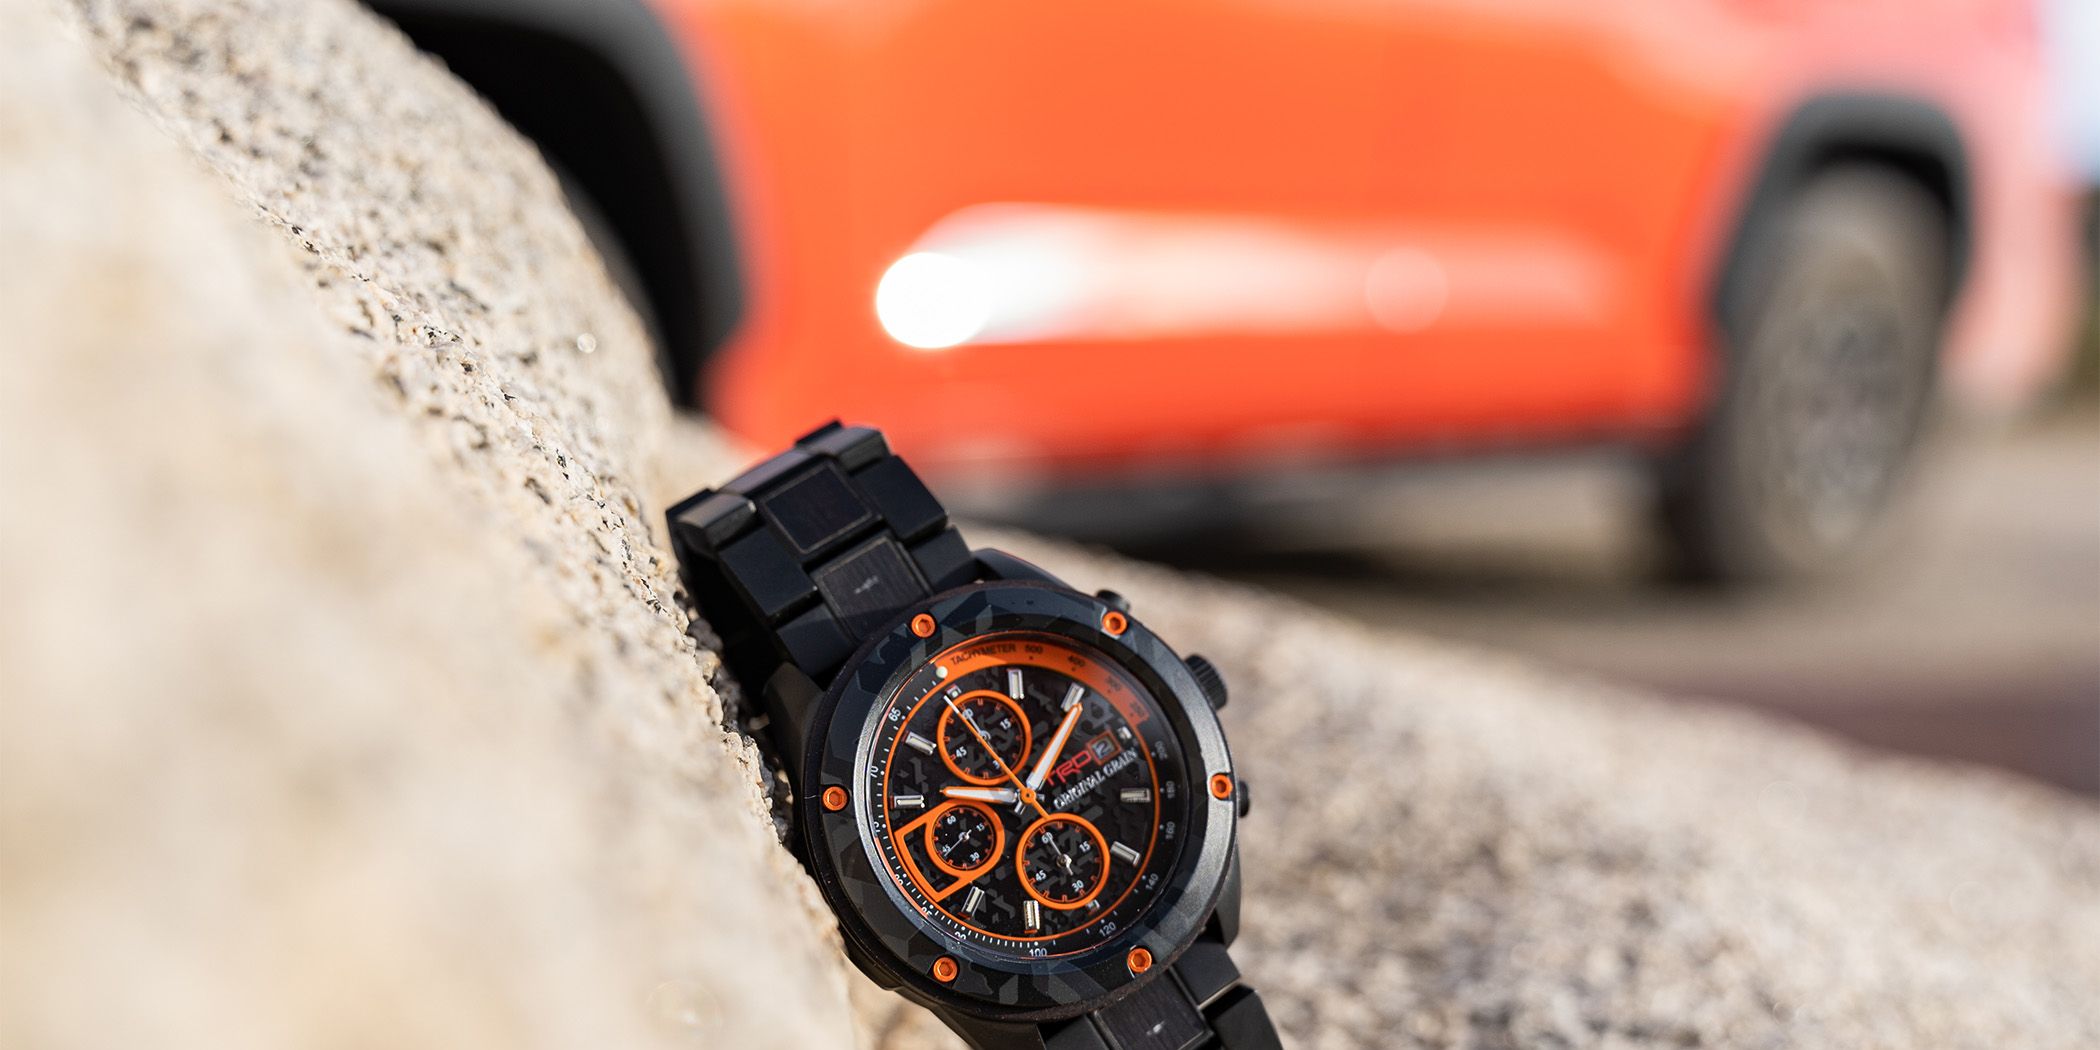 Father's Day Gift, Nailed: These Toyota TRD Watches Make an Awesome Gift for Dad